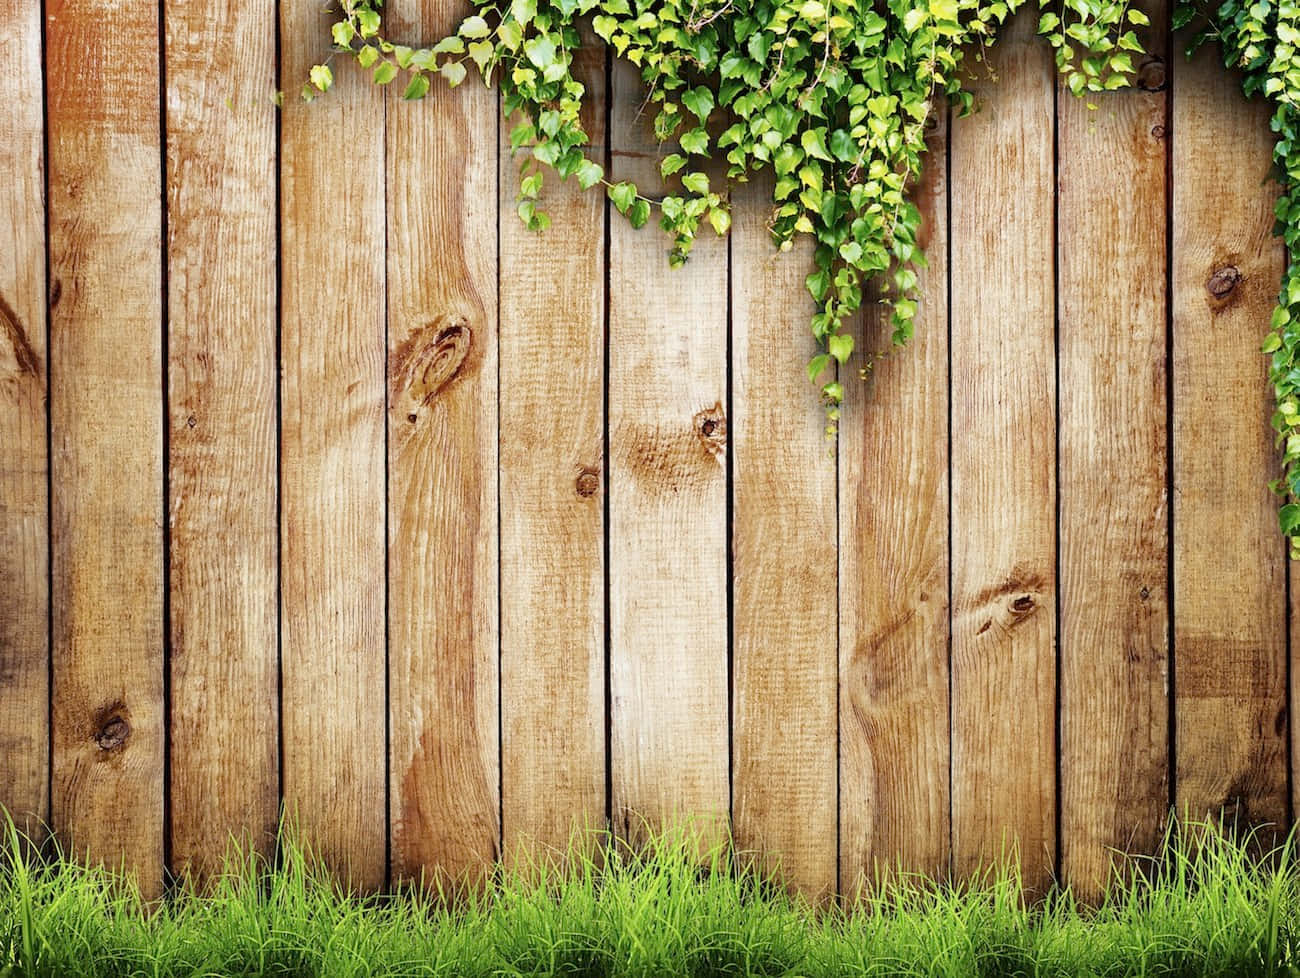 A View of an Iron Fence Standing Against a Lush Green Background